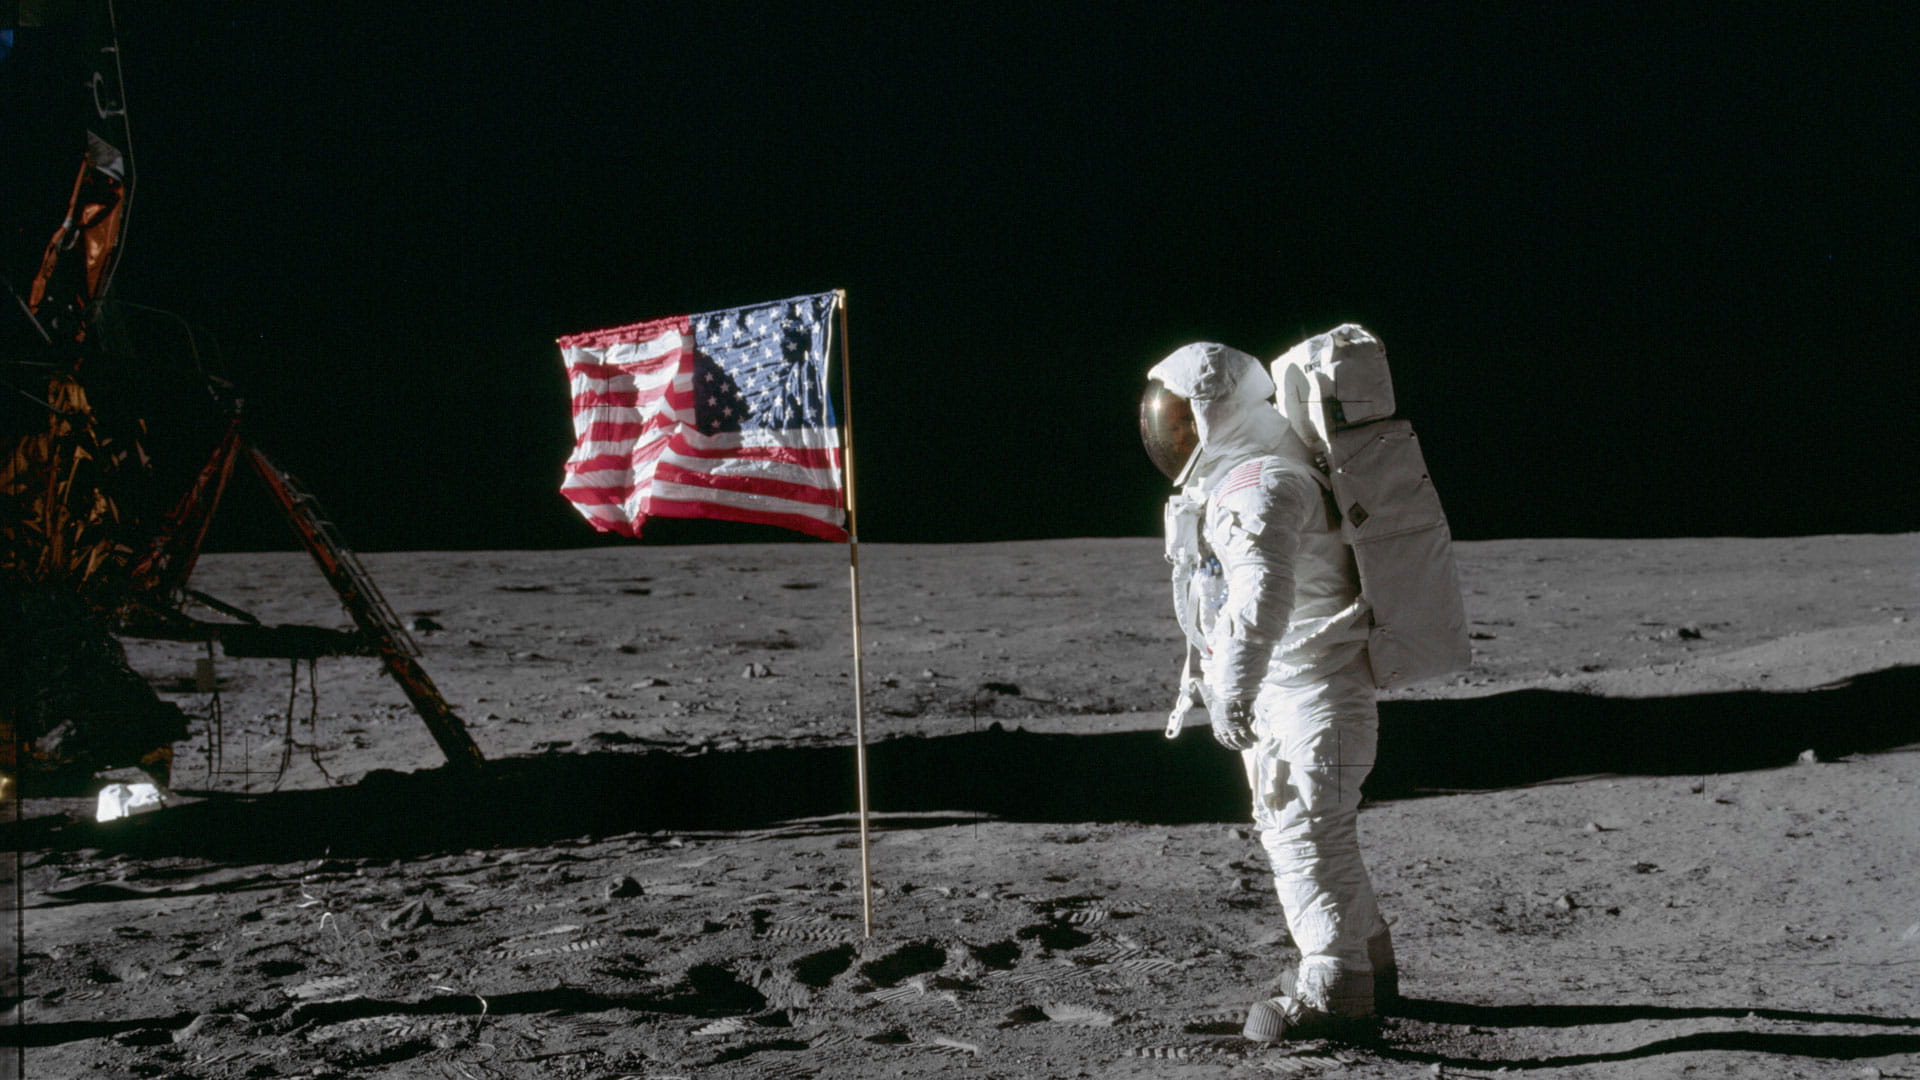 Astronaut on the moon looking at the U.S. flag